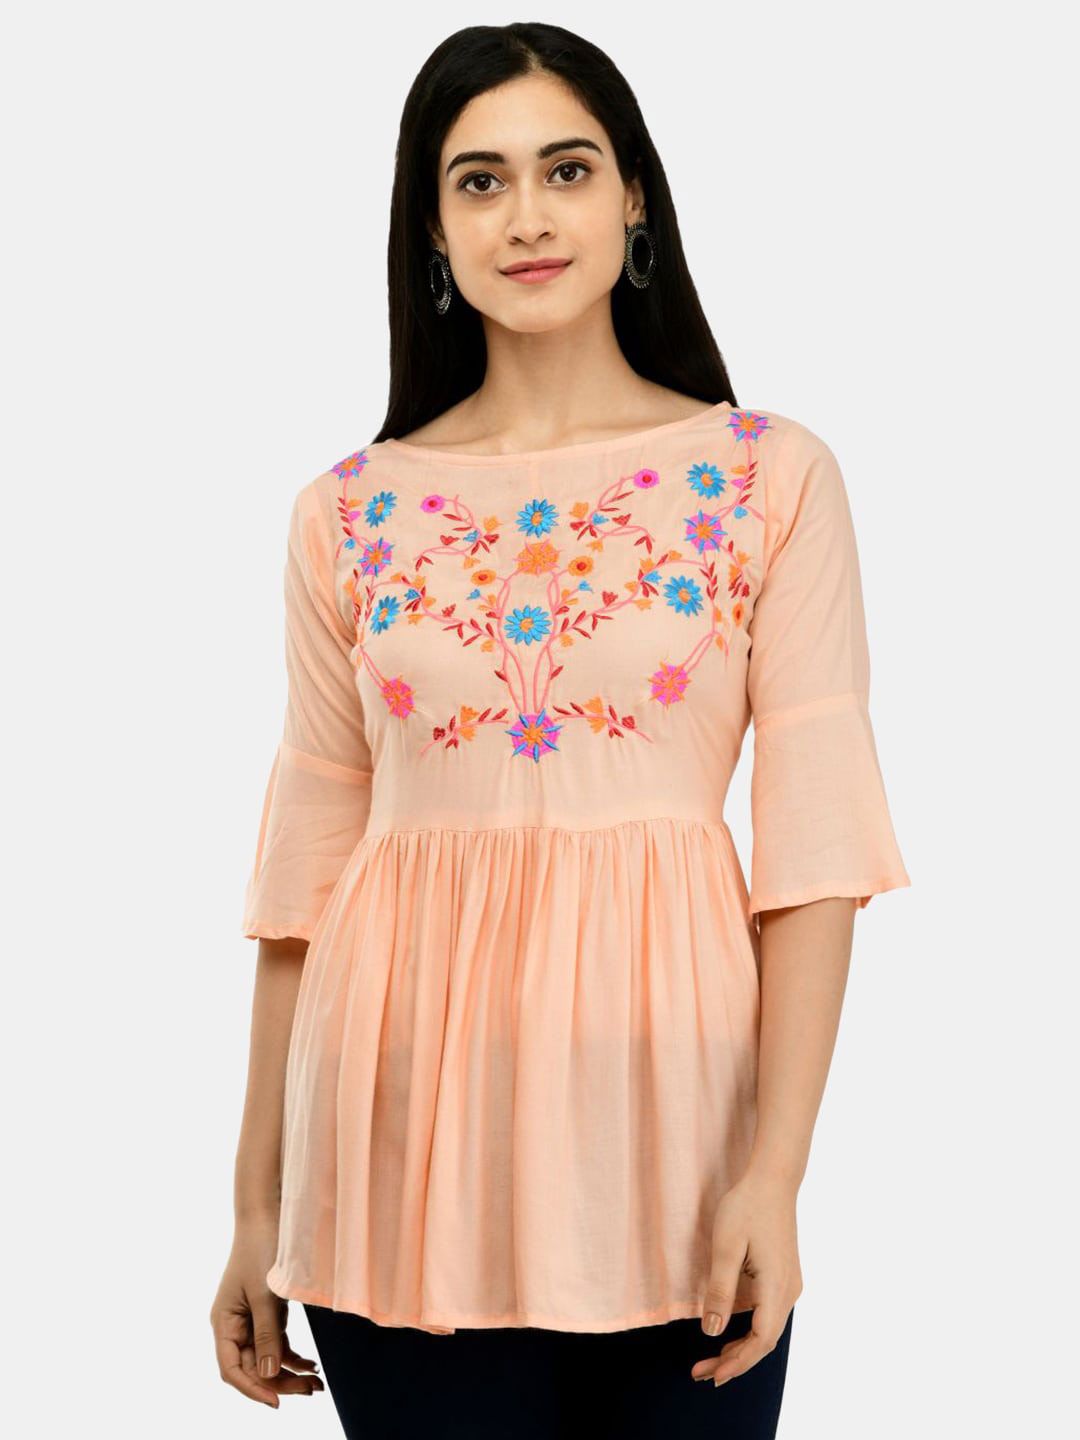 SAAKAA Floral Embroidered Peplum Top Price in India